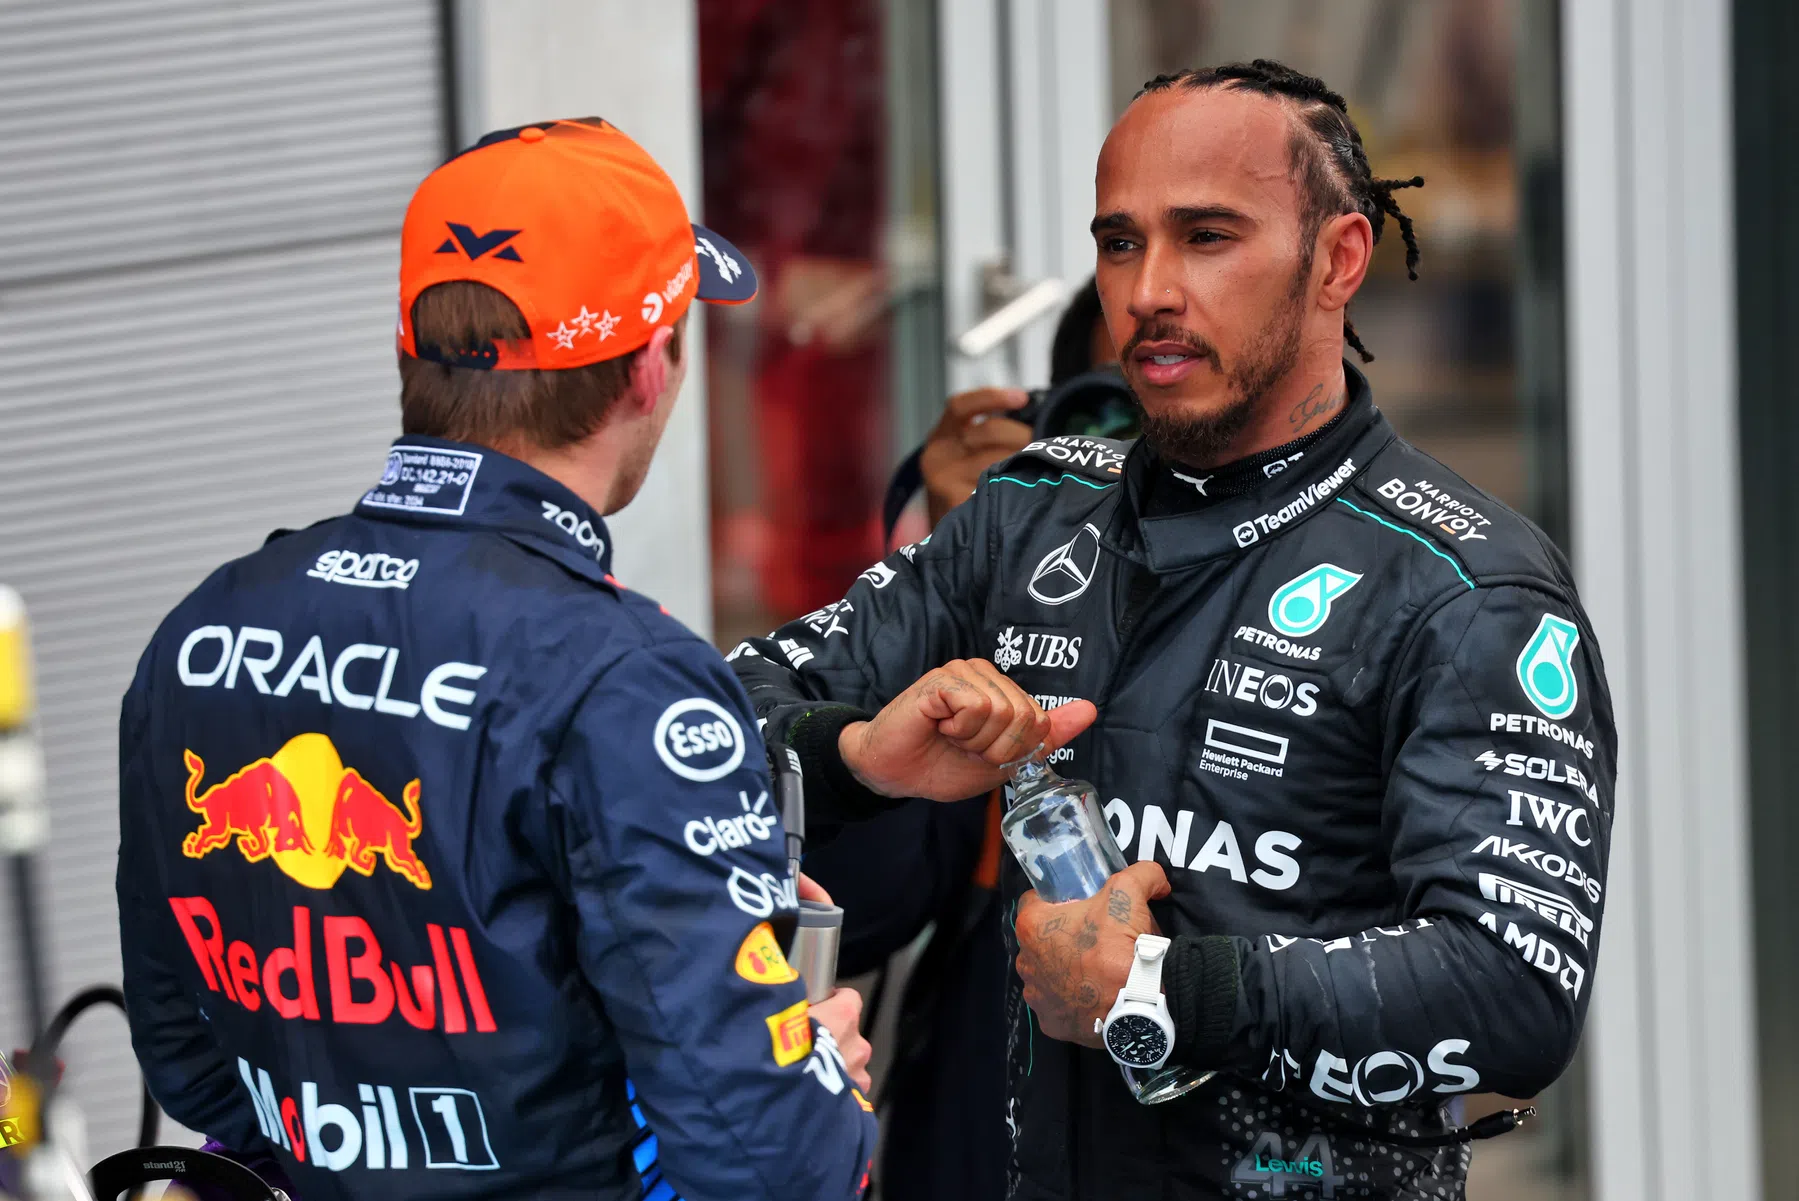 Hamilton reacts to Russell start in Spanish Grand Prix